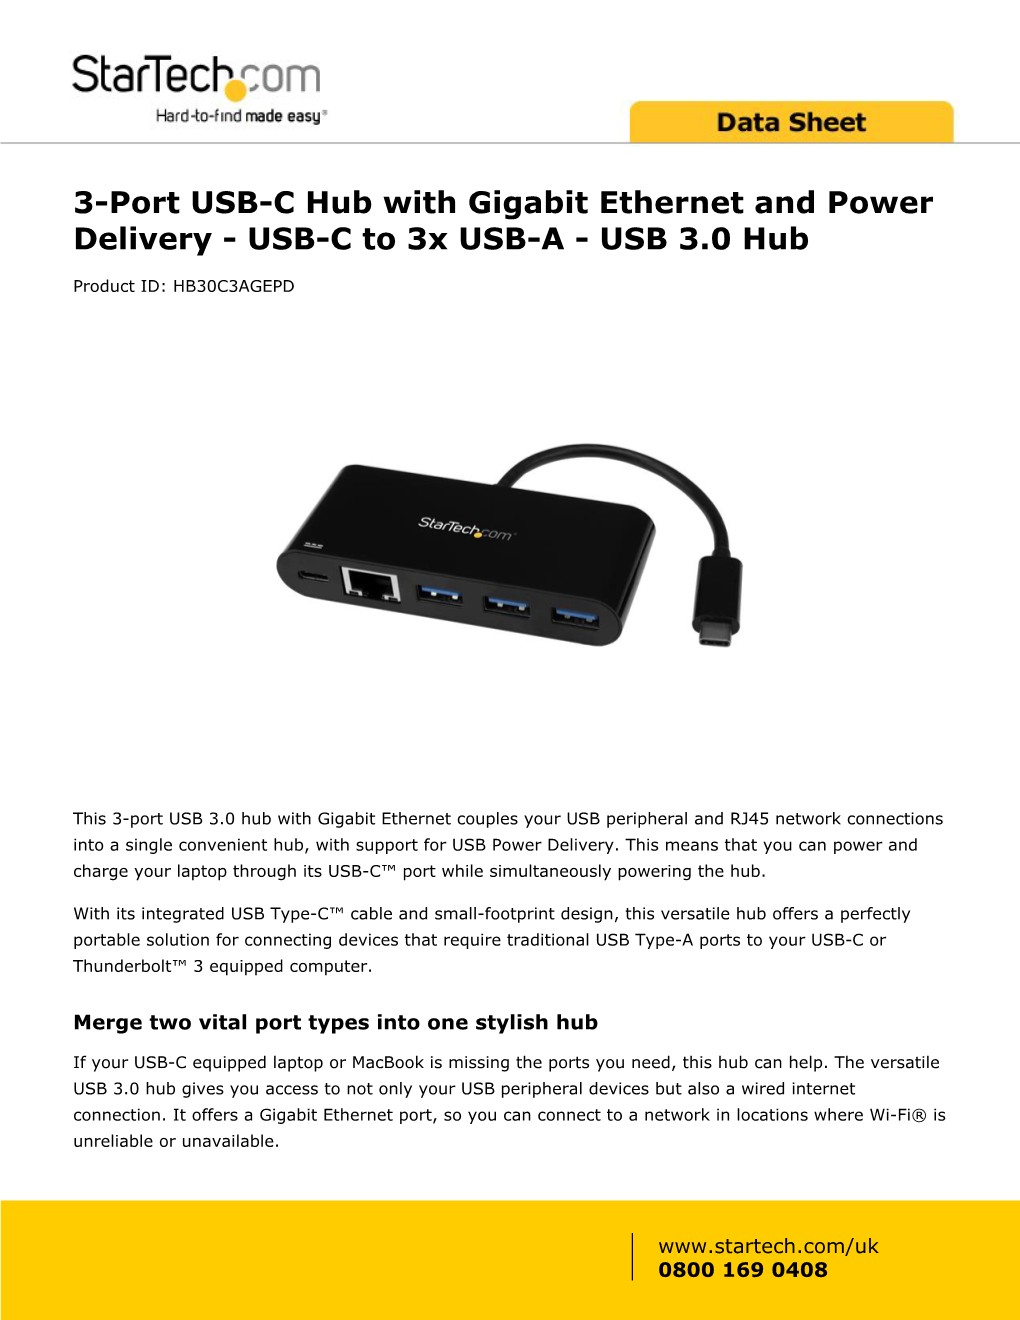 3-Port USB-C Hub with Gigabit Ethernet and Power Delivery - USB-C to 3X USB-A - USB 3.0 Hub